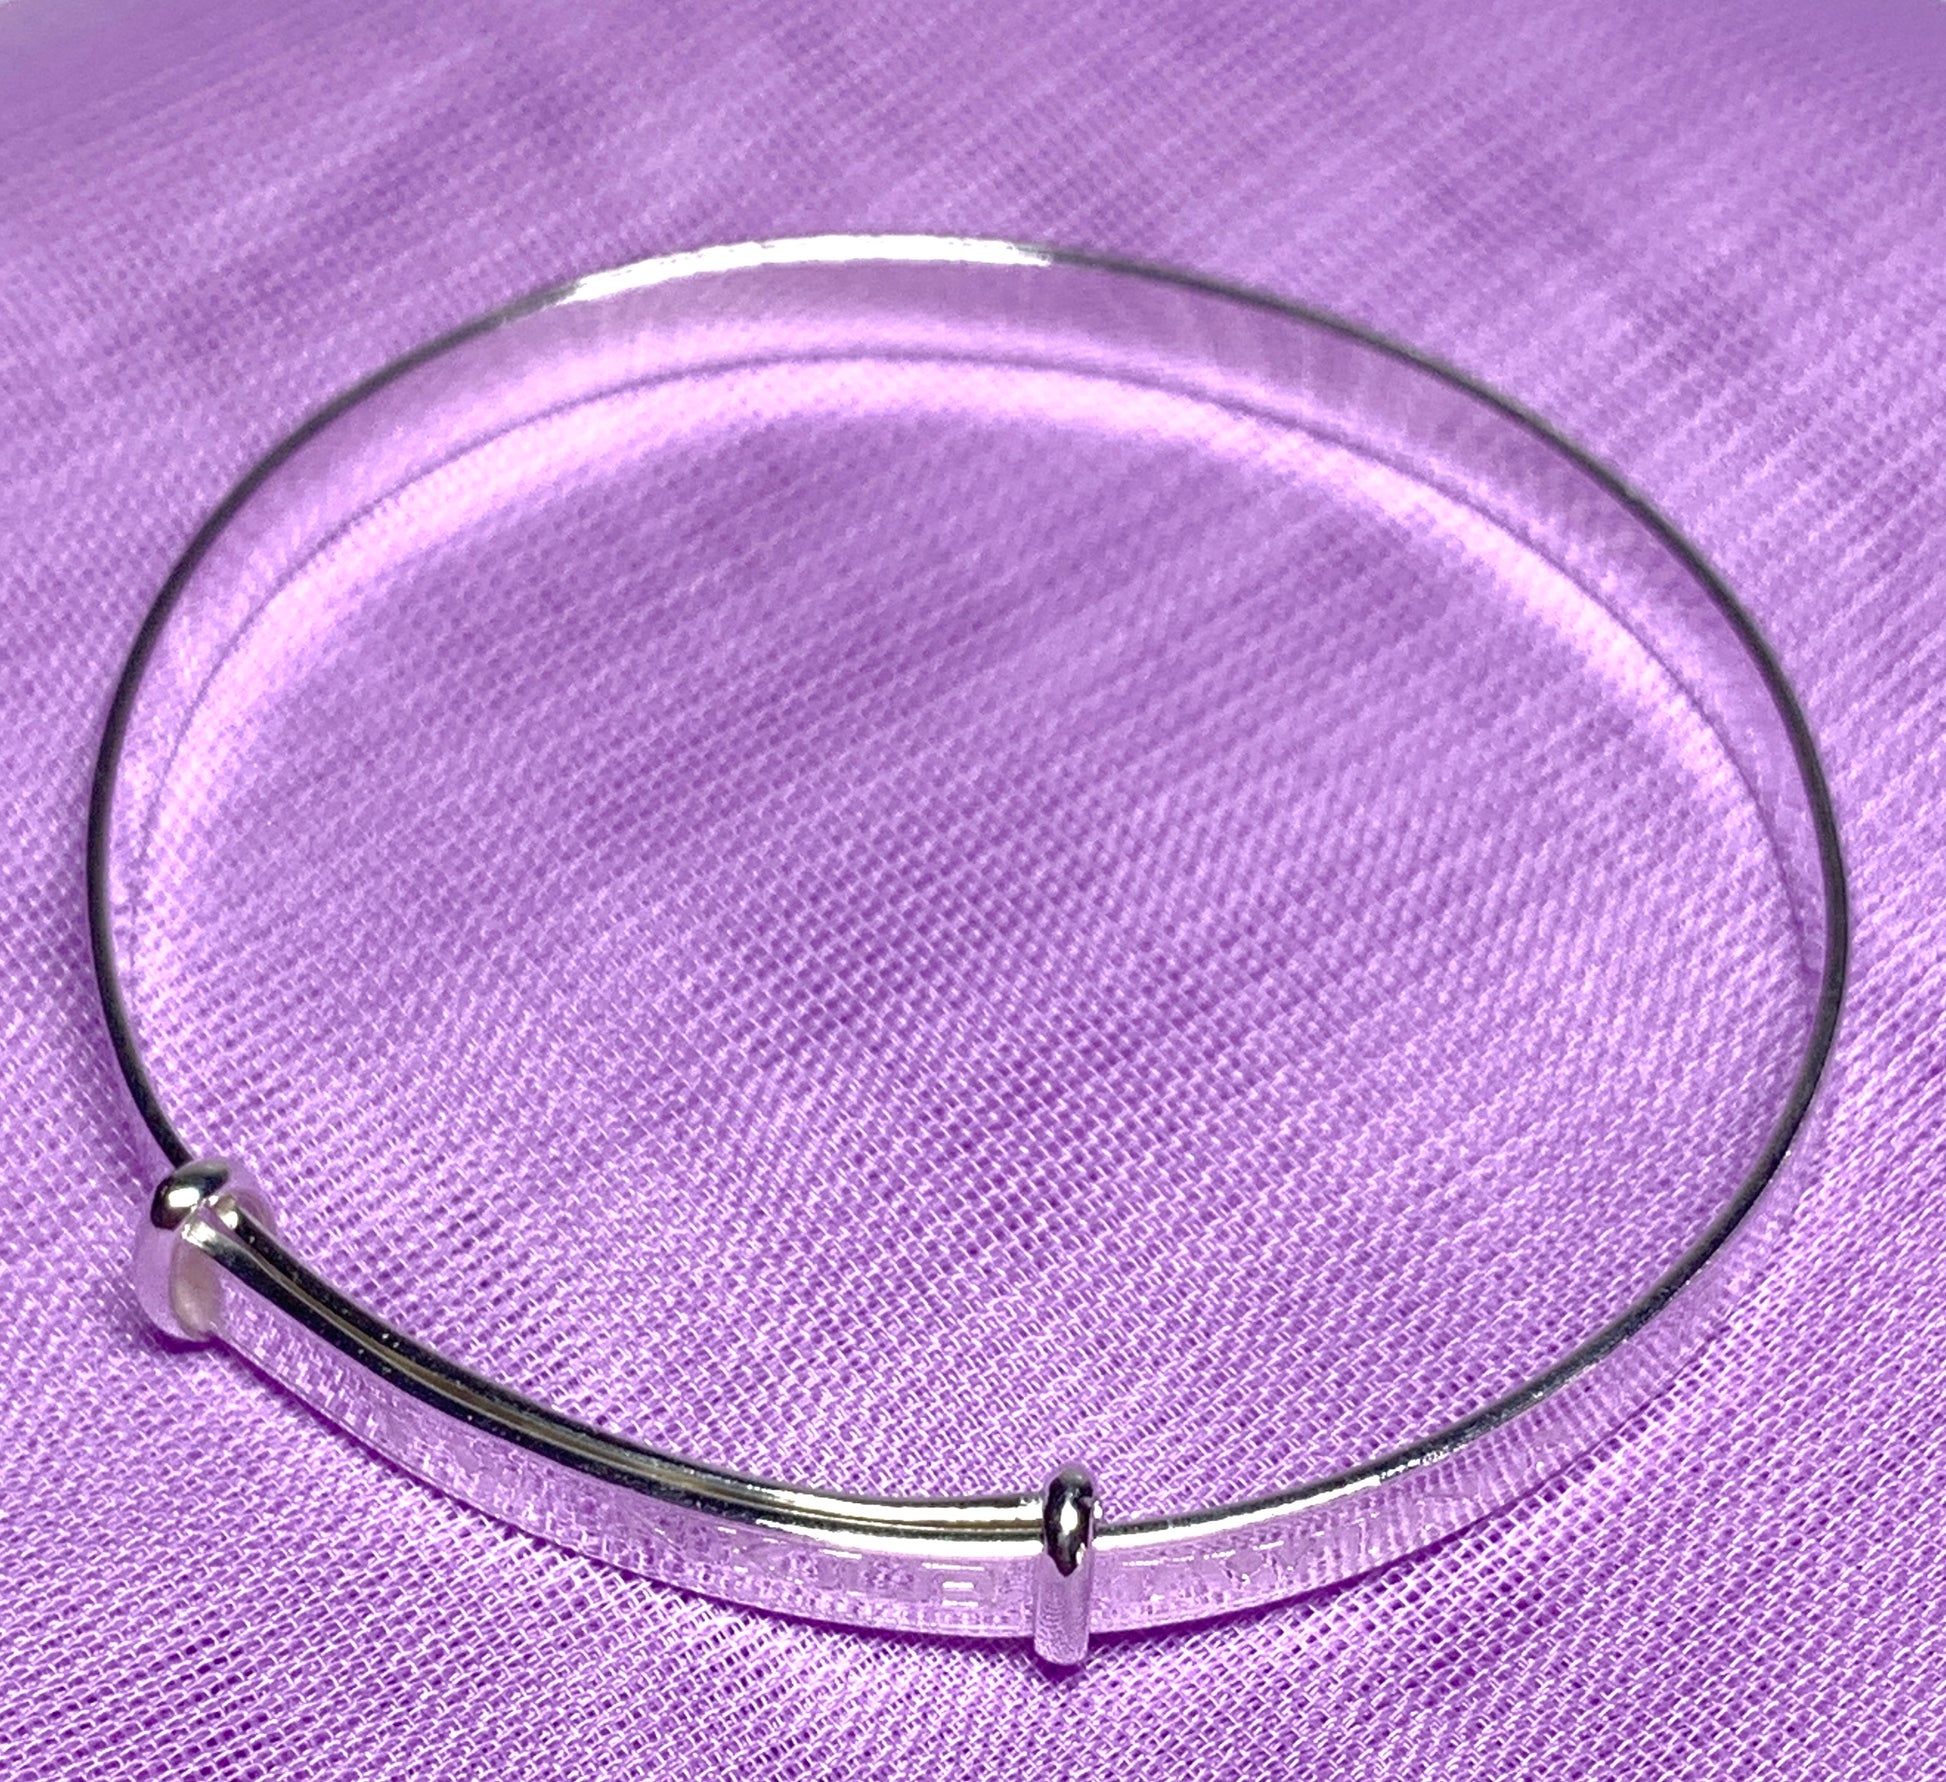 Twinkle Twinkle Little Star child’s expanding bangle design sterling silver